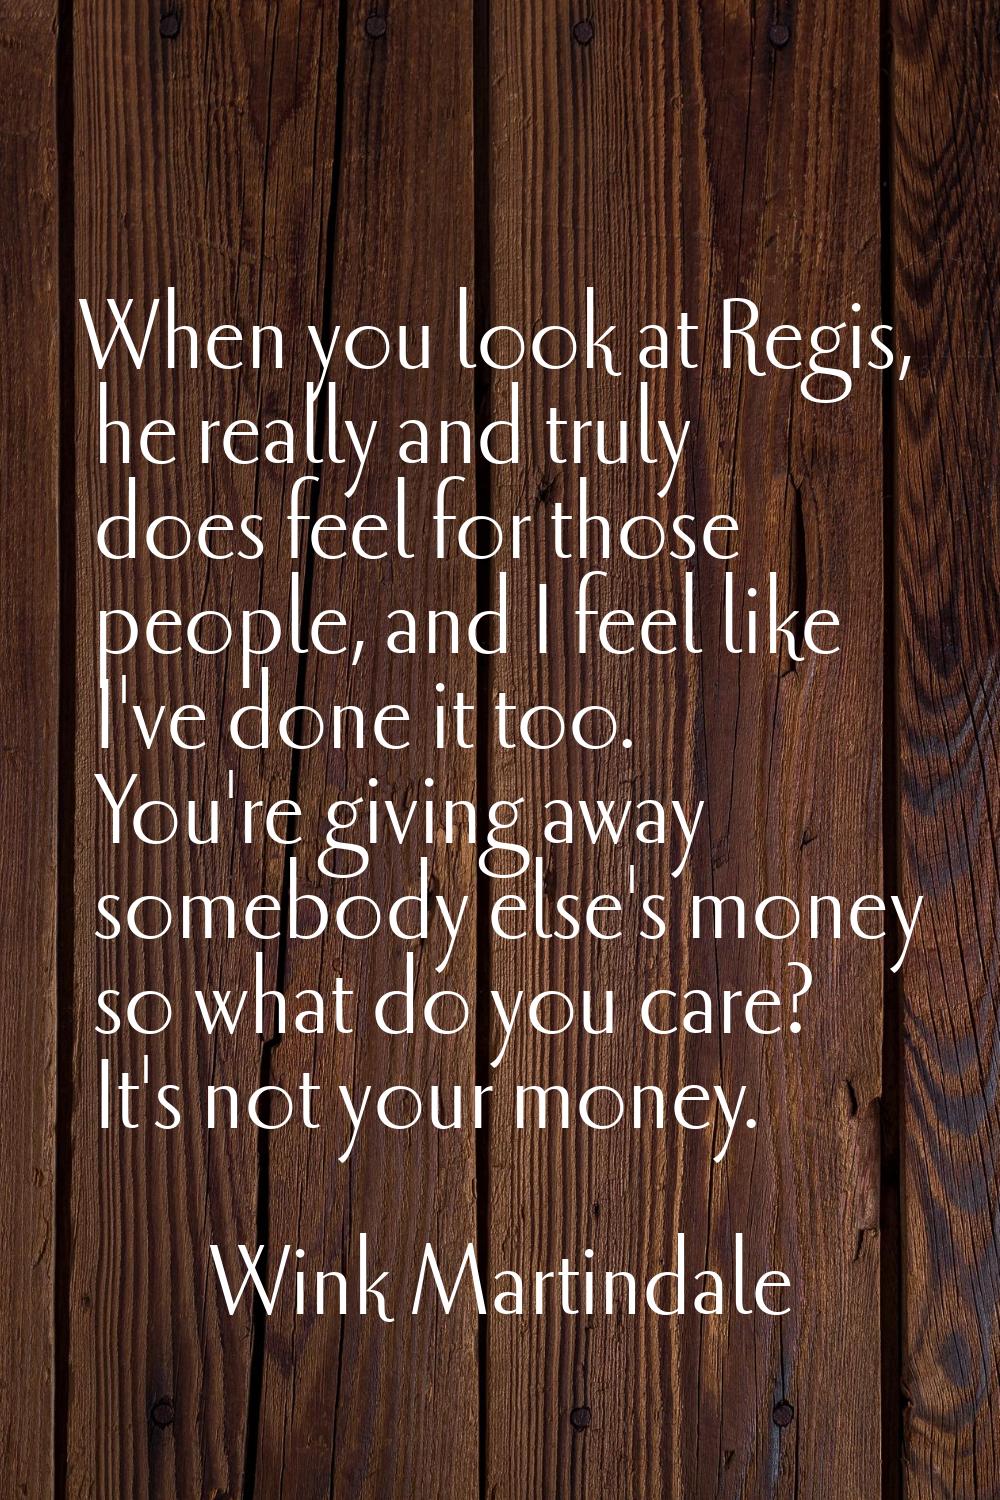 When you look at Regis, he really and truly does feel for those people, and I feel like I've done i